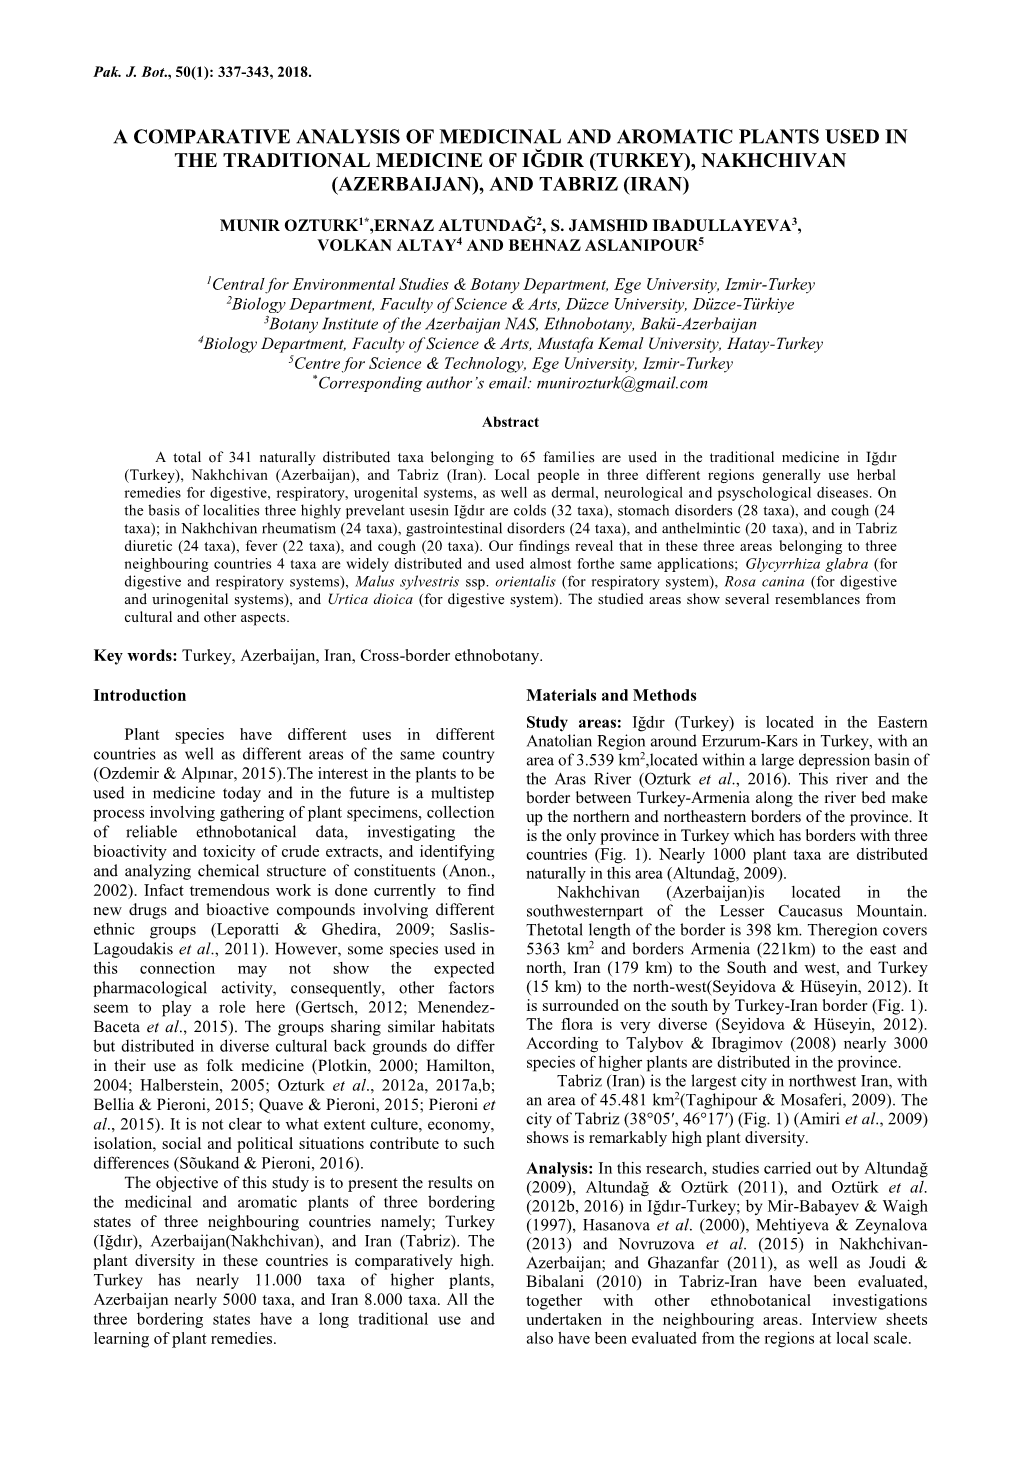 A Comparative Analysis of Medicinal and Aromatic Plants Used in the Traditional Medicine of Iğdir (Turkey), Nakhchivan (Azerbaijan), and Tabriz (Iran)